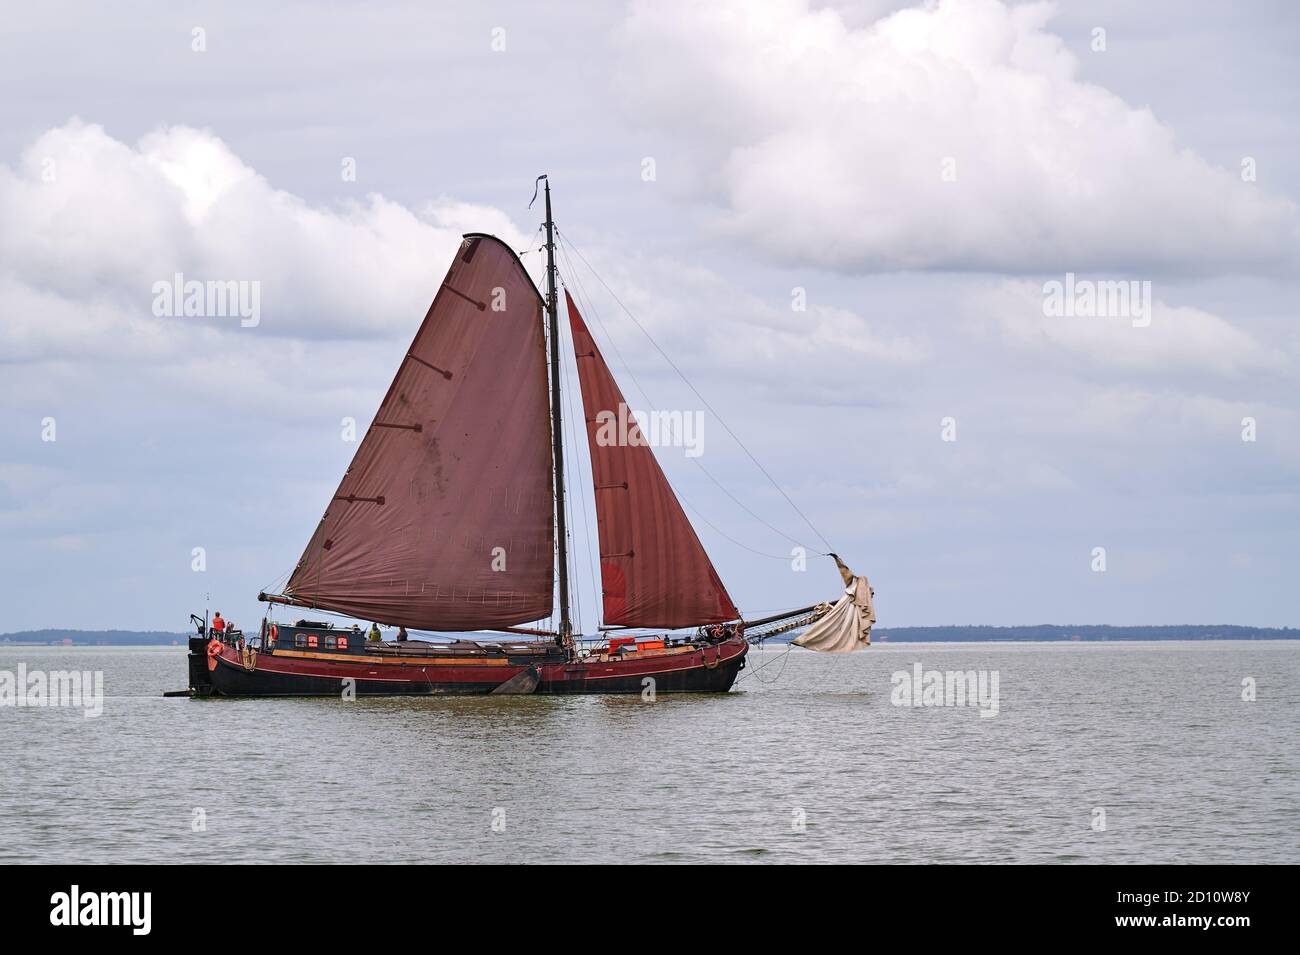 Flat bottom ship with red sails on the IJsselmeer Stock Photo